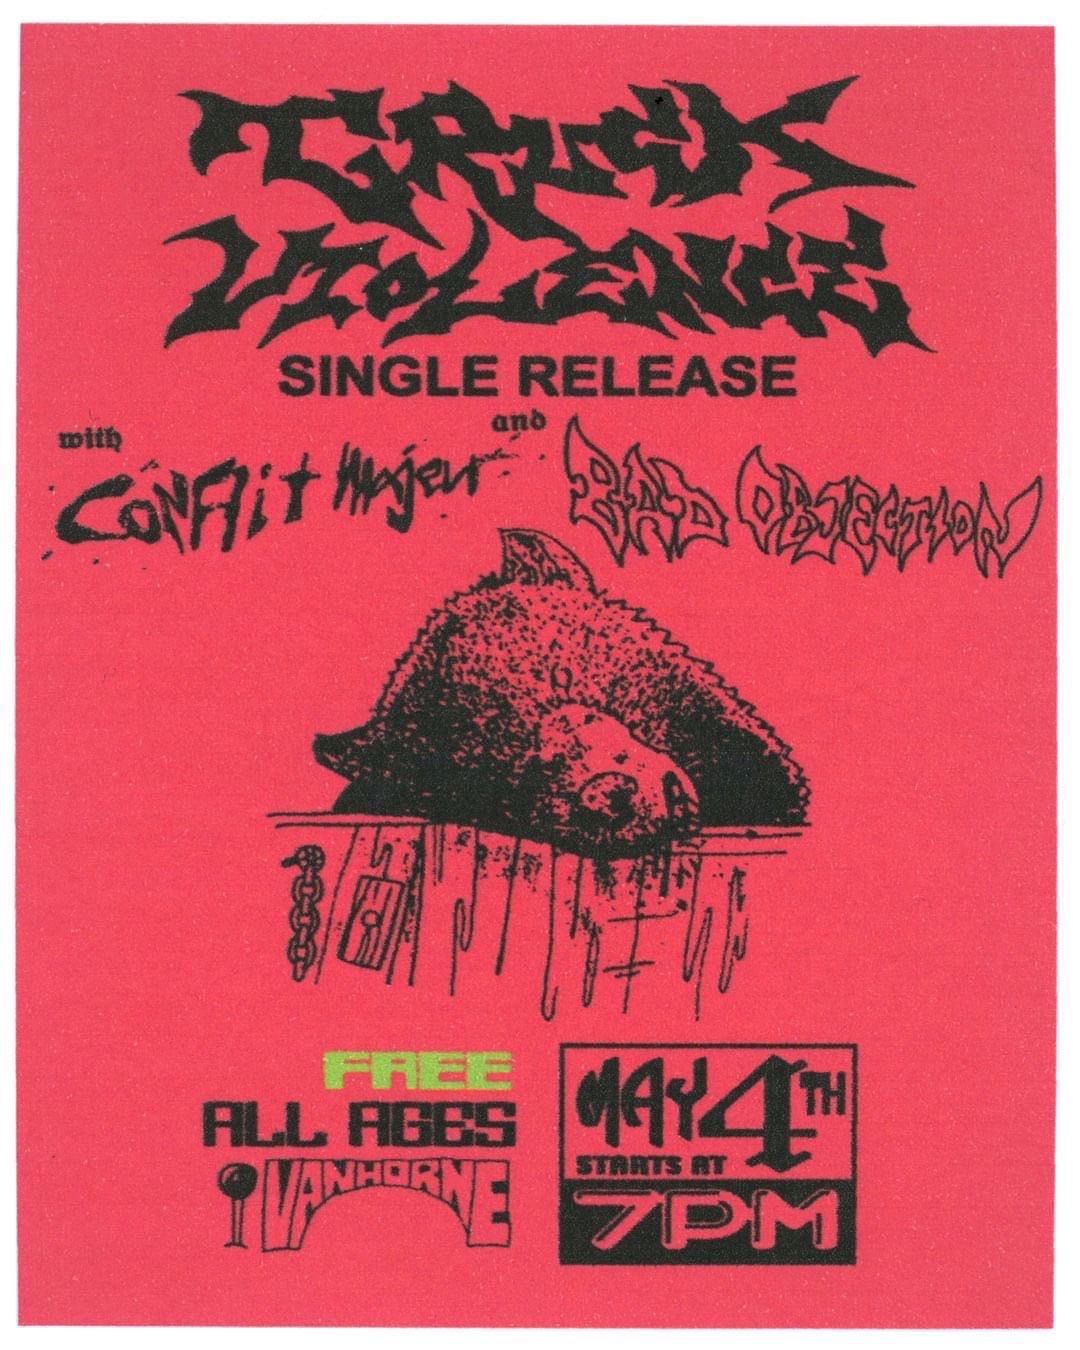 TRUCK VIOLENCE SINGLE RELEASE SHOW + BAD OBJECTION & CONFLIT MAJEUR